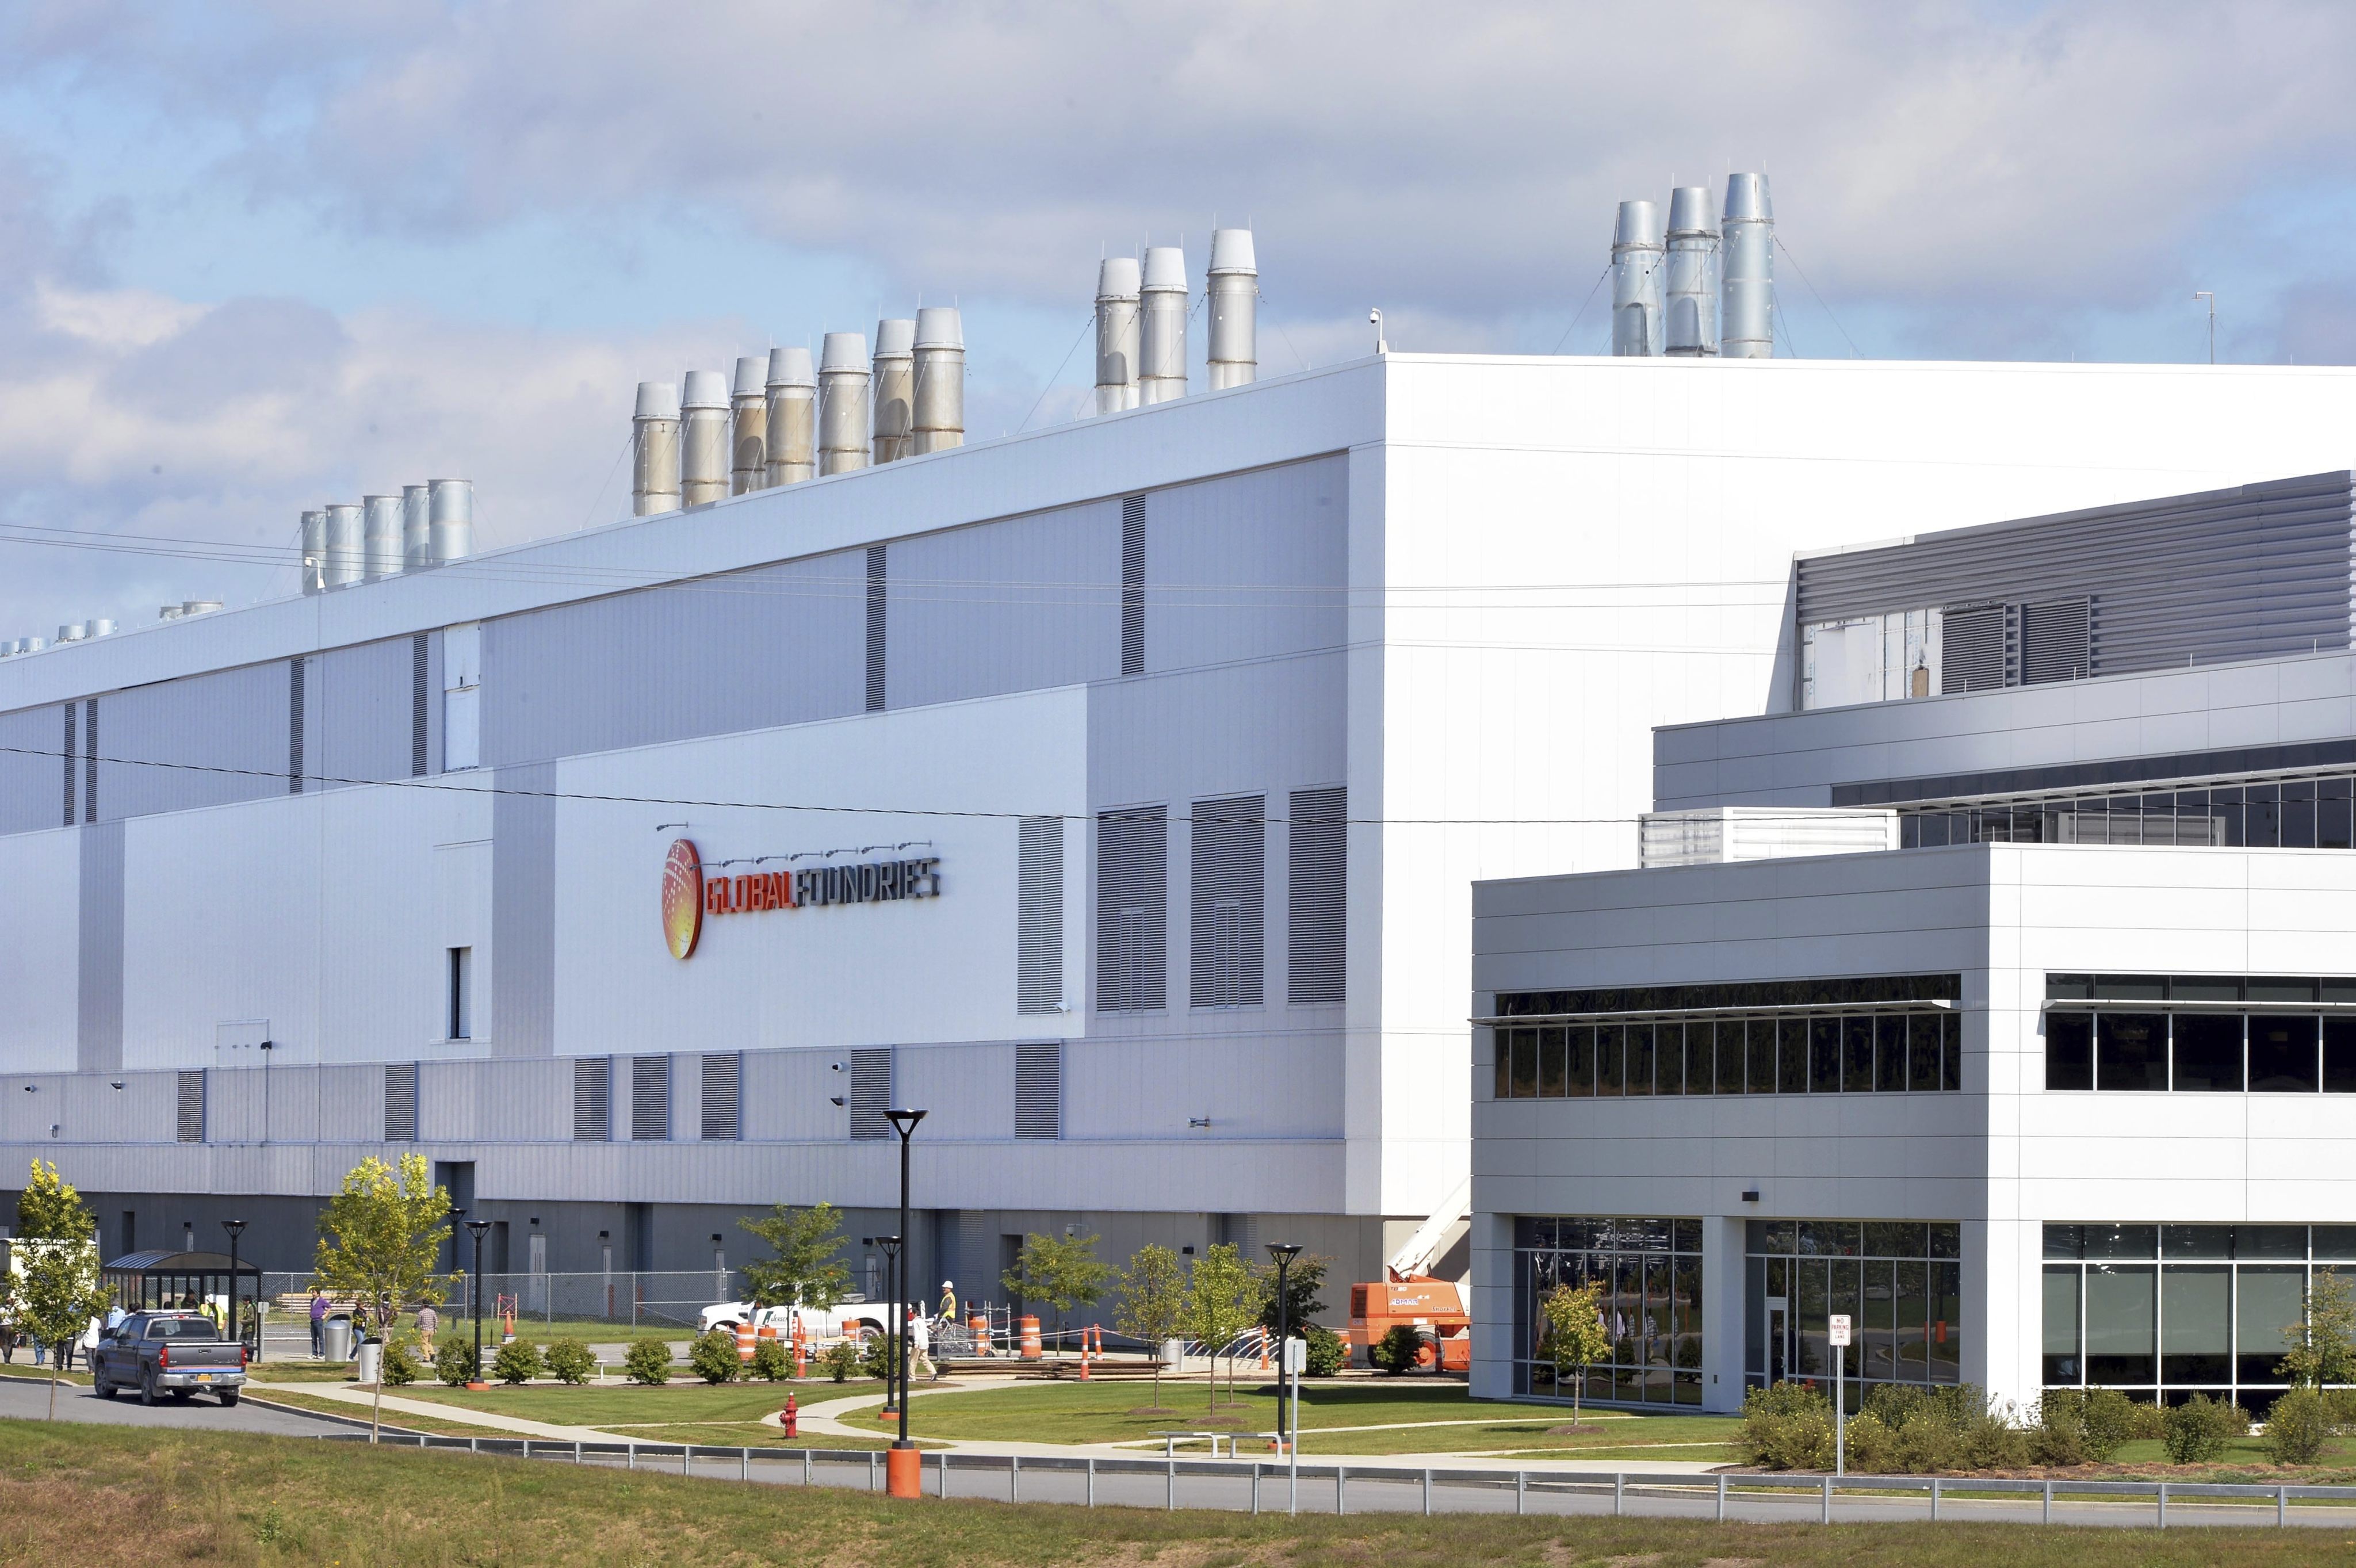 The Globalfoundries building in Malta, New York. Photo: The Albany Times Union via AP